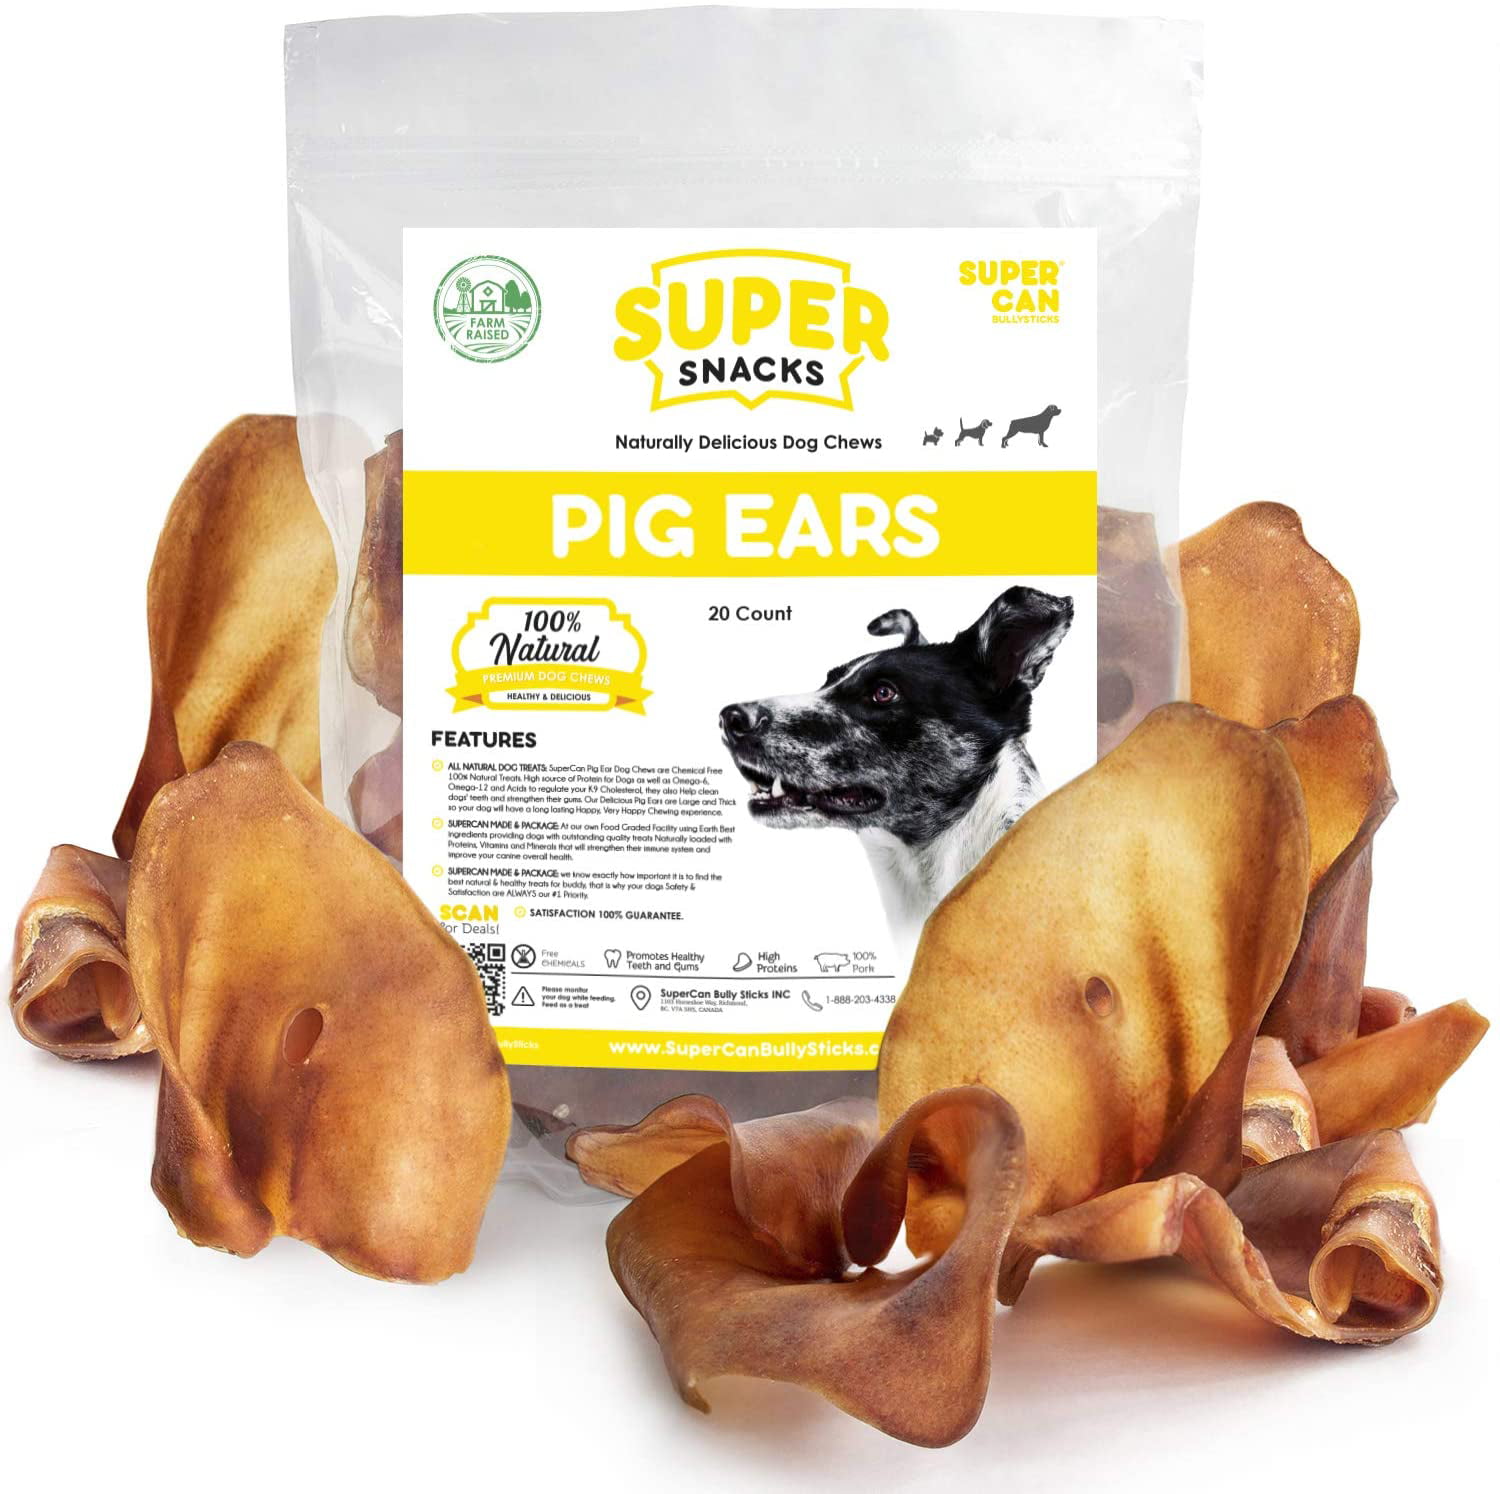 Quality Dog Chews 100% Natural Pork Ears Full of Protein for Your Pet 123 Treats Pig Ears for Dogs 50 Count 